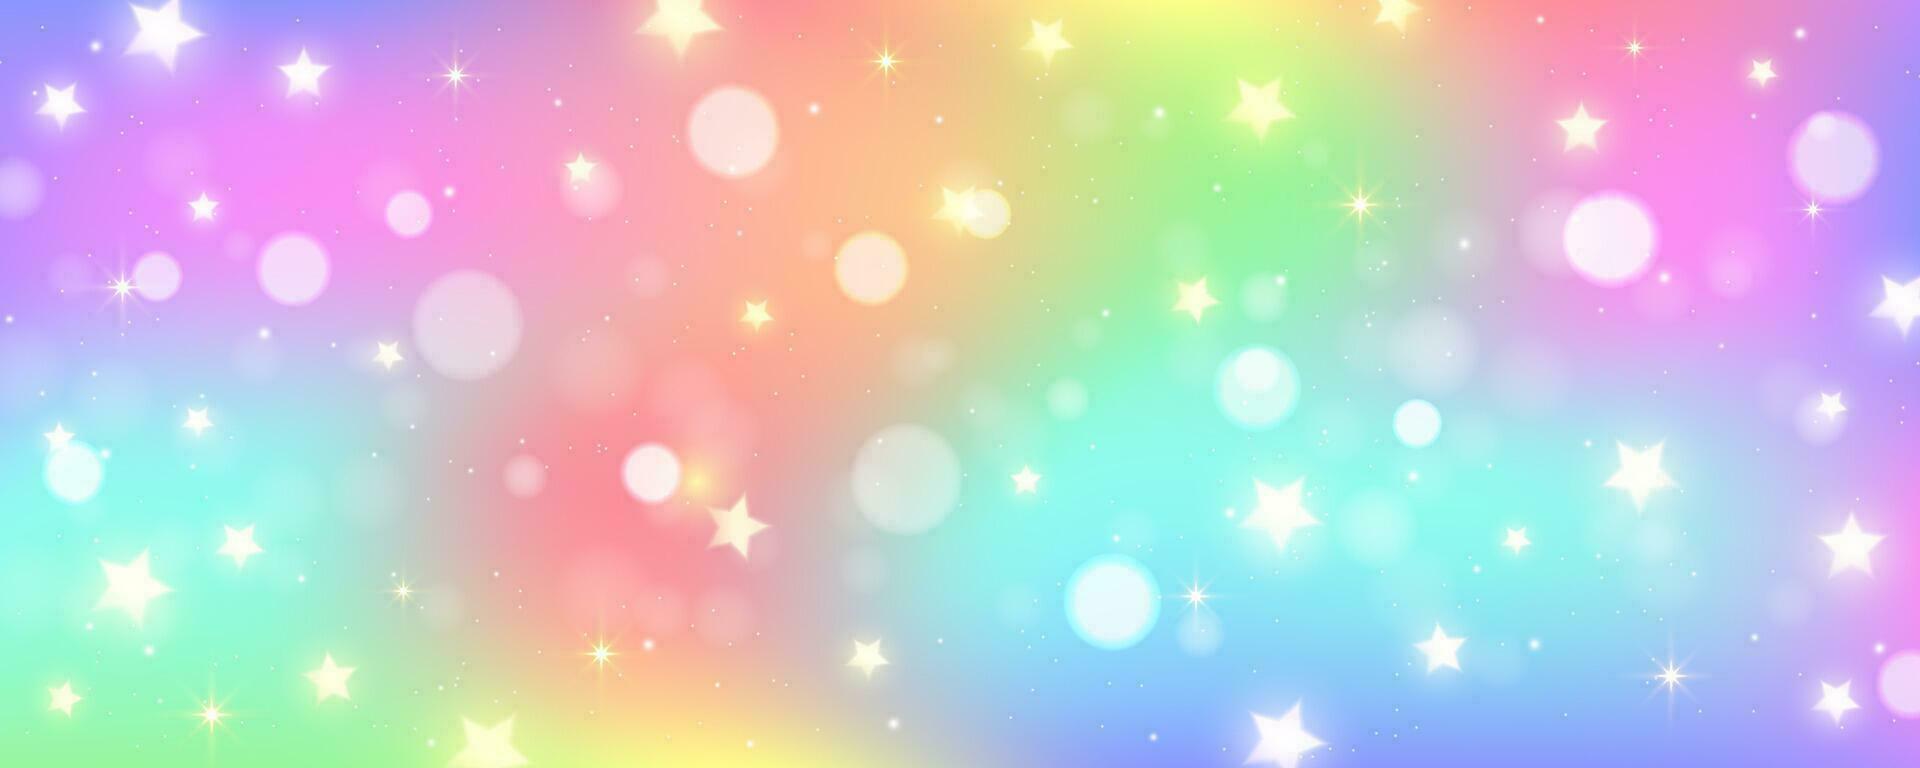 Rainbow unicorn background. Pastel watercolor sky with glitter stars and bokeh. Fantasy galaxy with holographic texture. Magic marble space. Vector